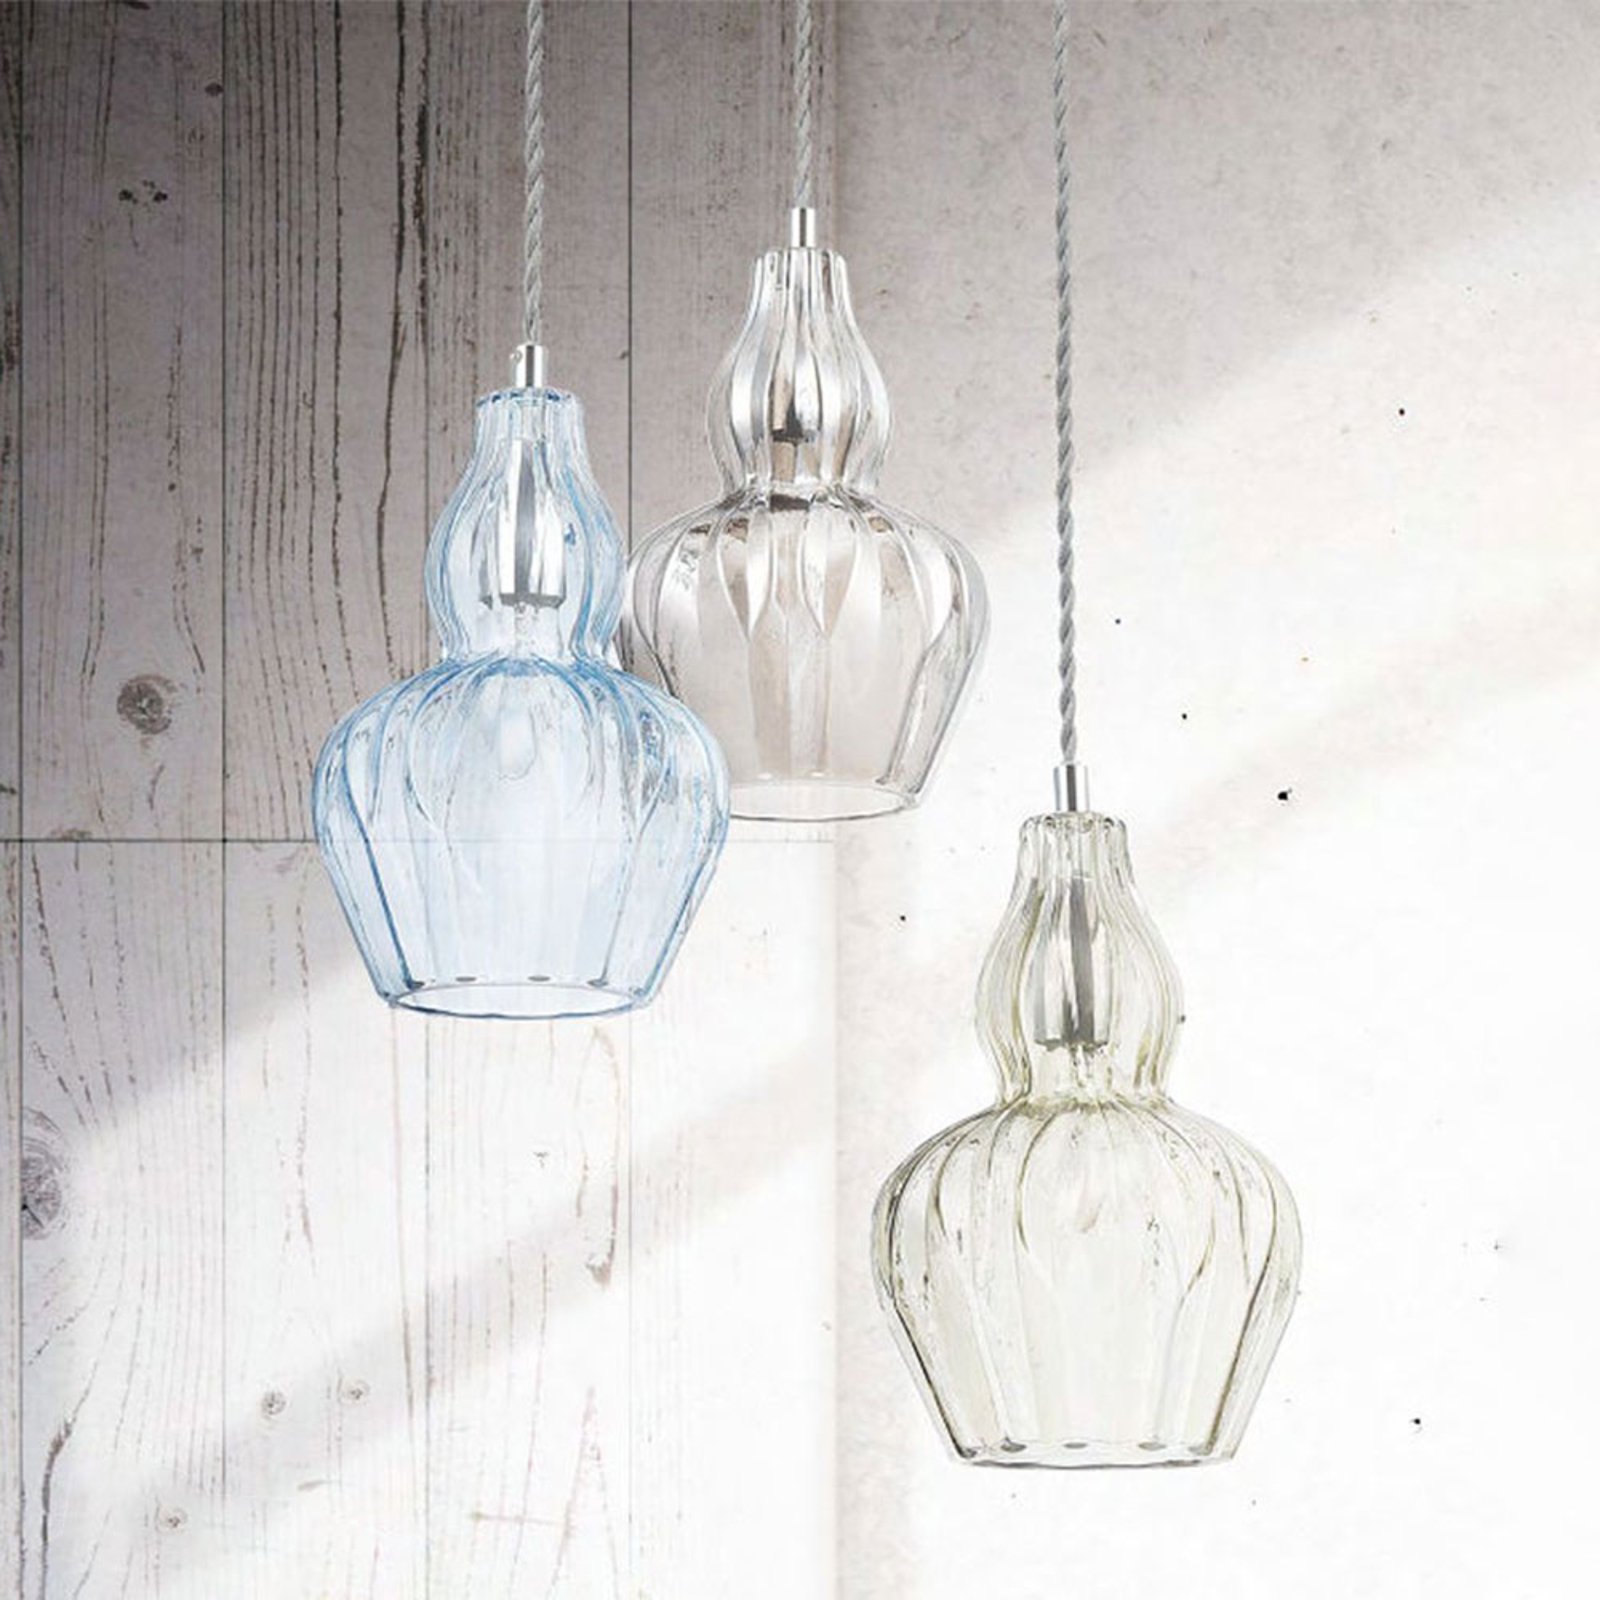 Eustoma pendant light with clear glass